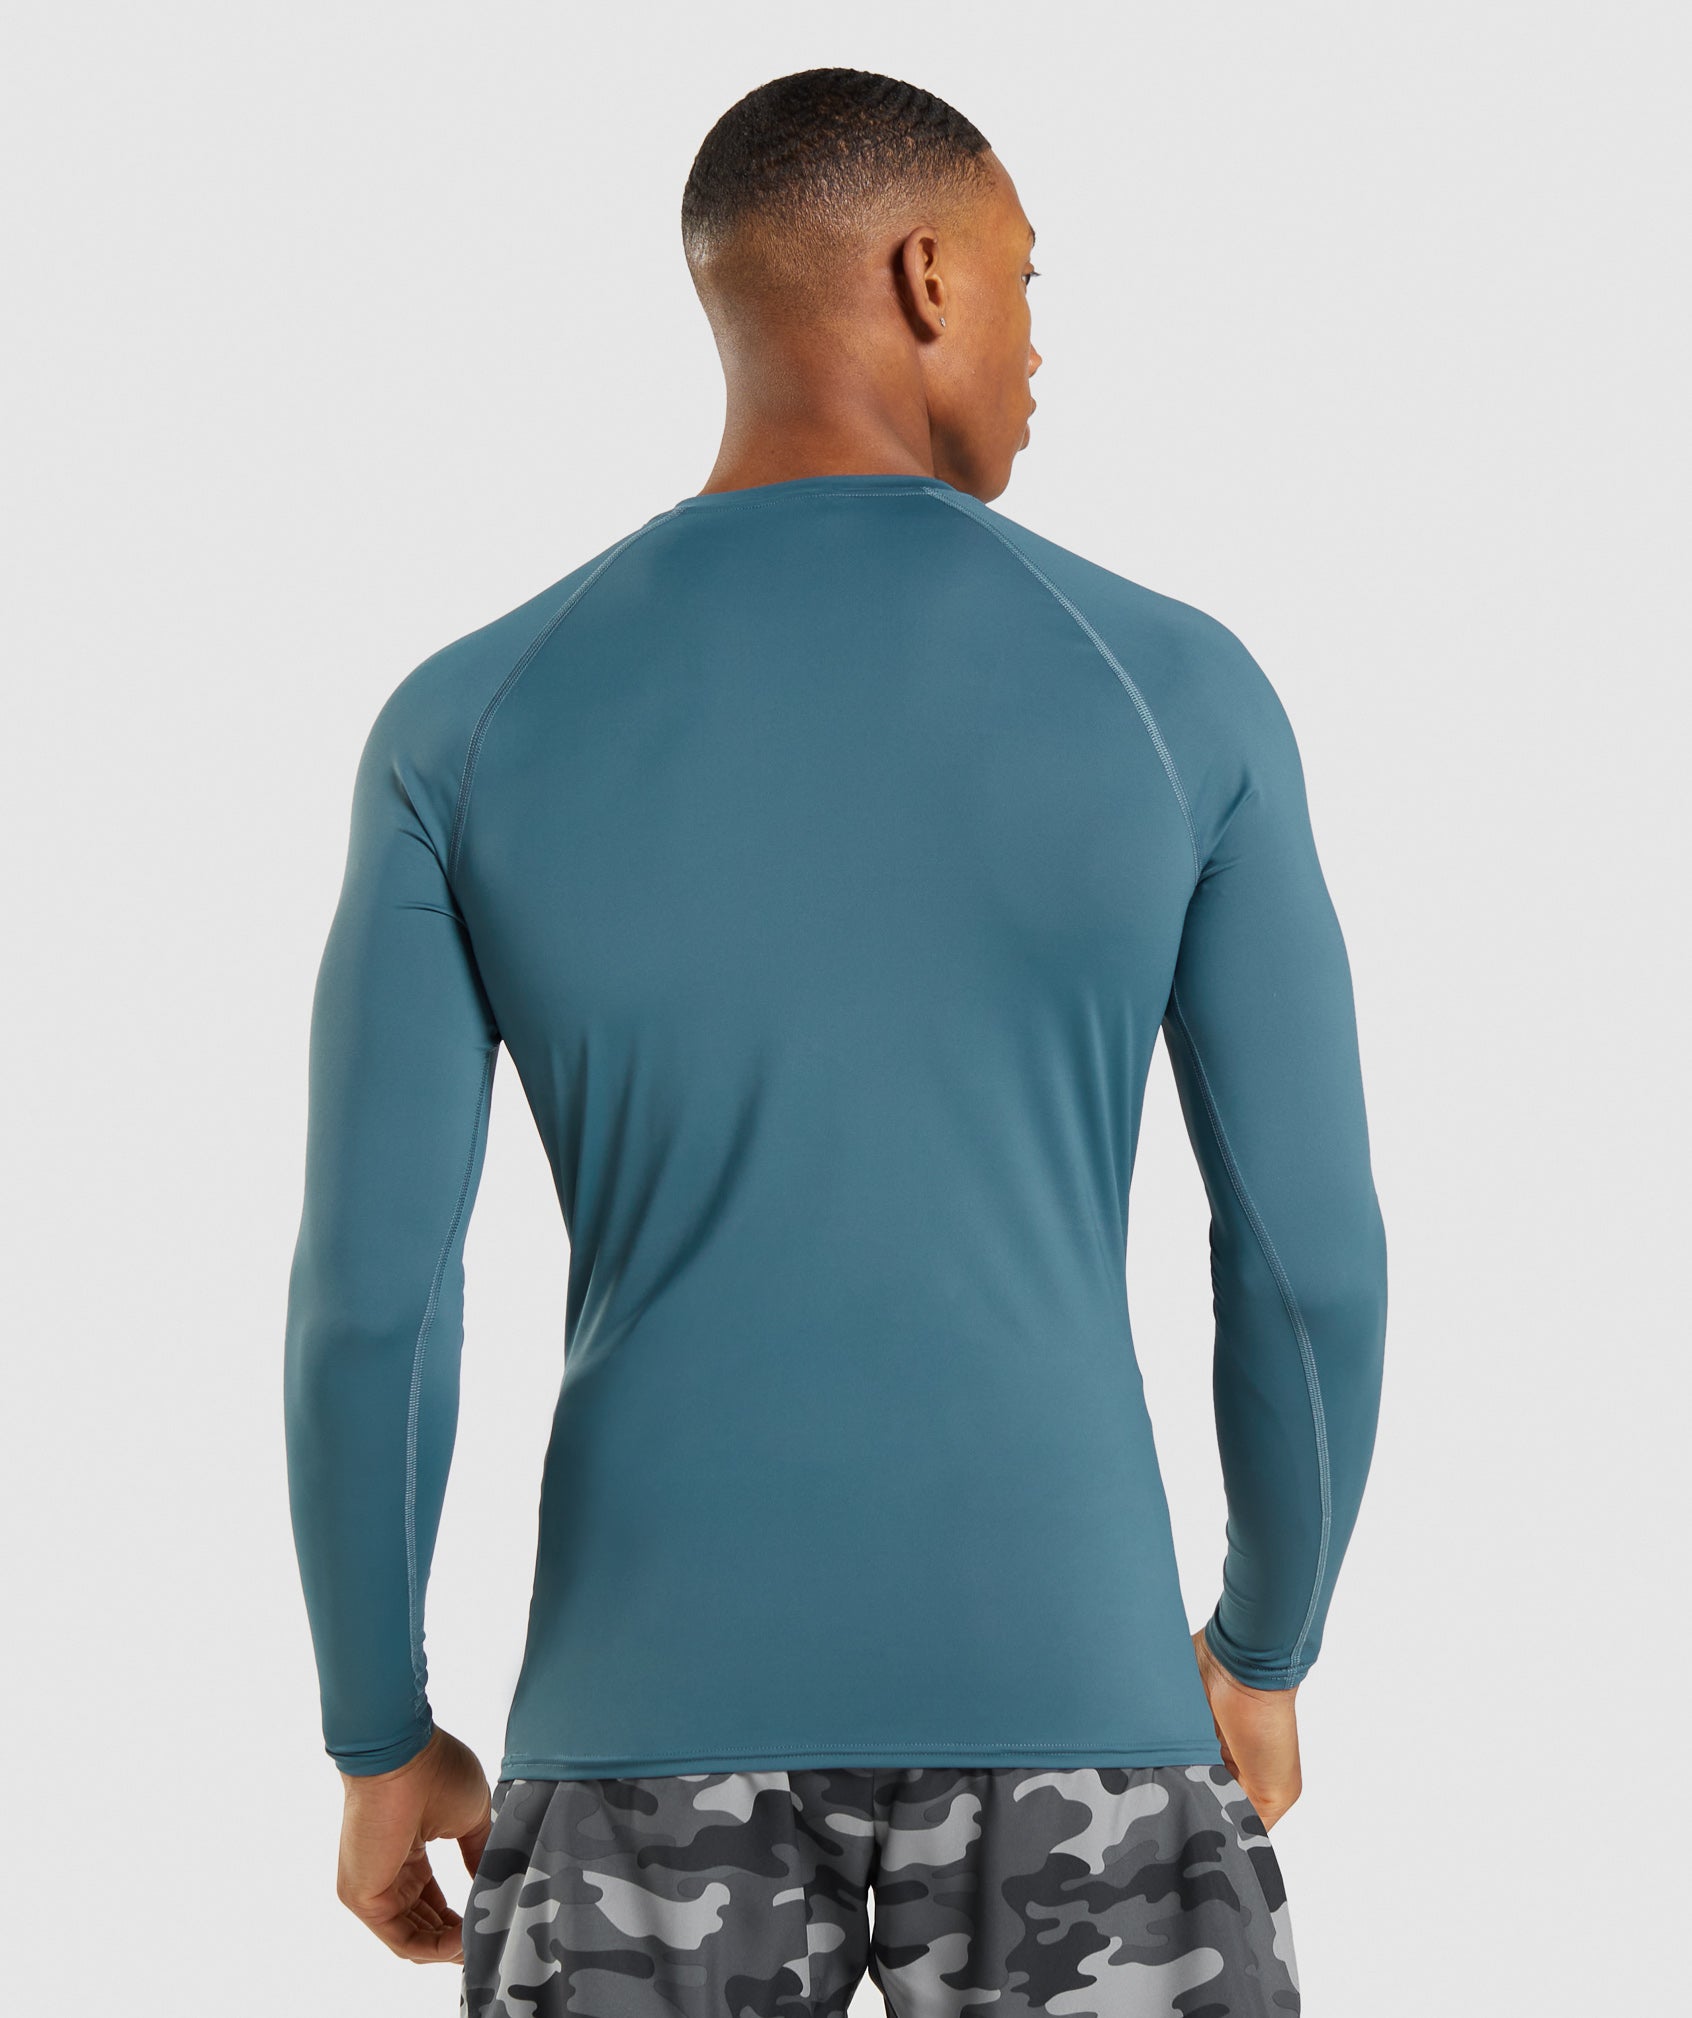 Element Baselayer Long Sleeve T-Shirt in Tuscan Teal - view 3